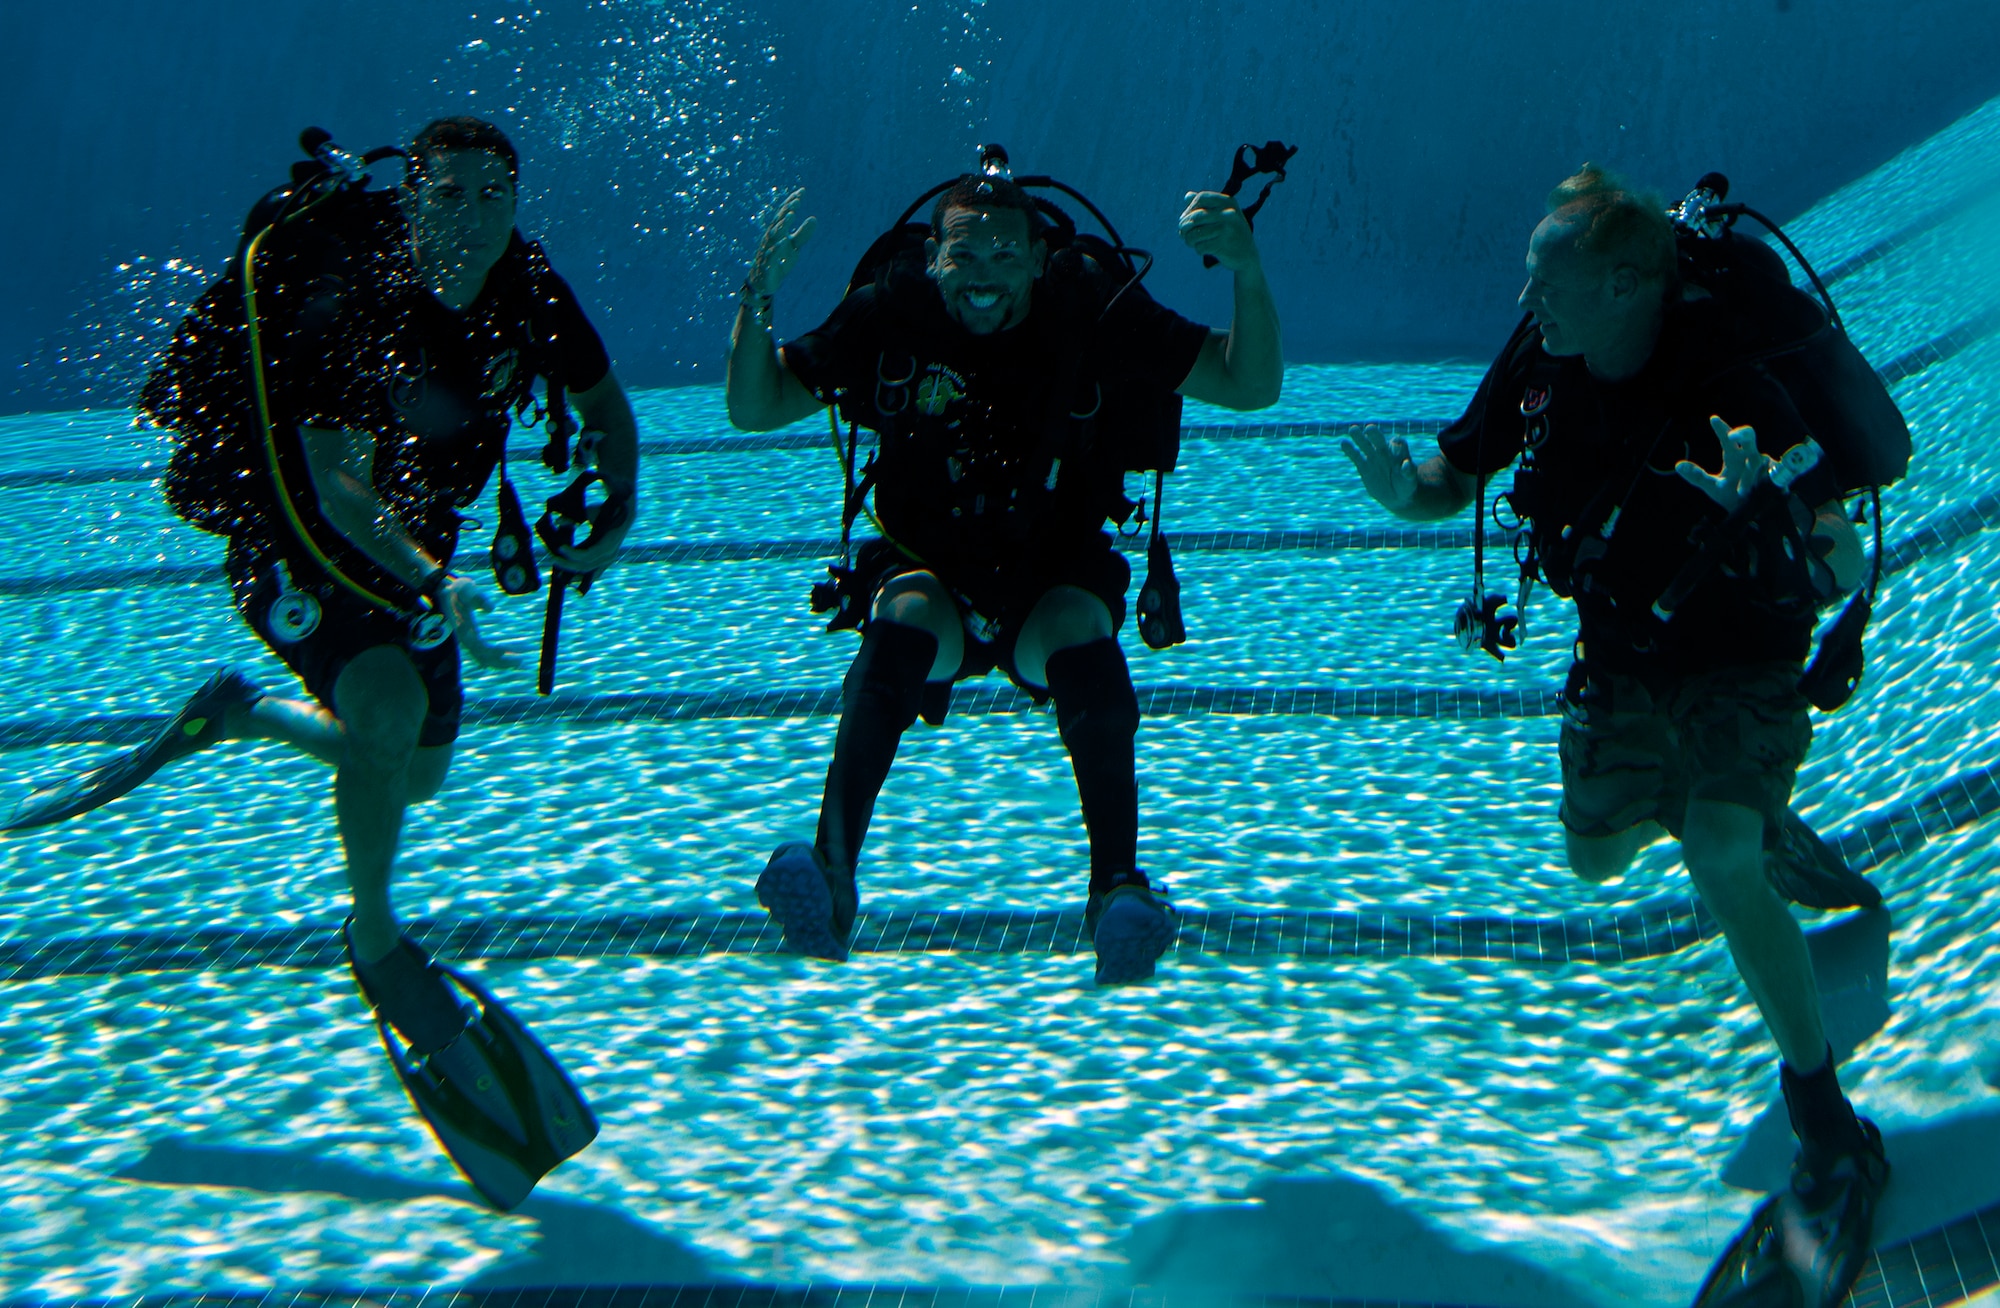 Johnnie Yellock, middle, retired Staff Sgt. and 23rd Special Tactics Squadron combat controller, takes a group photo with his instructors during SCUBA-Pool Emergency Procedures training on Hurlburt Field, Fla. Oct. 21, 2014. “I’ve always given credit to my family and faith for my resiliency, but more than that it’s just surrounding yourself with great people,” said Yellock. “If you spend your life surrounding yourself with great people then when times get hard it makes it easier to rely on them.” (U.S. Air Force photo/Senior Airman Kentavist P. Brackin)